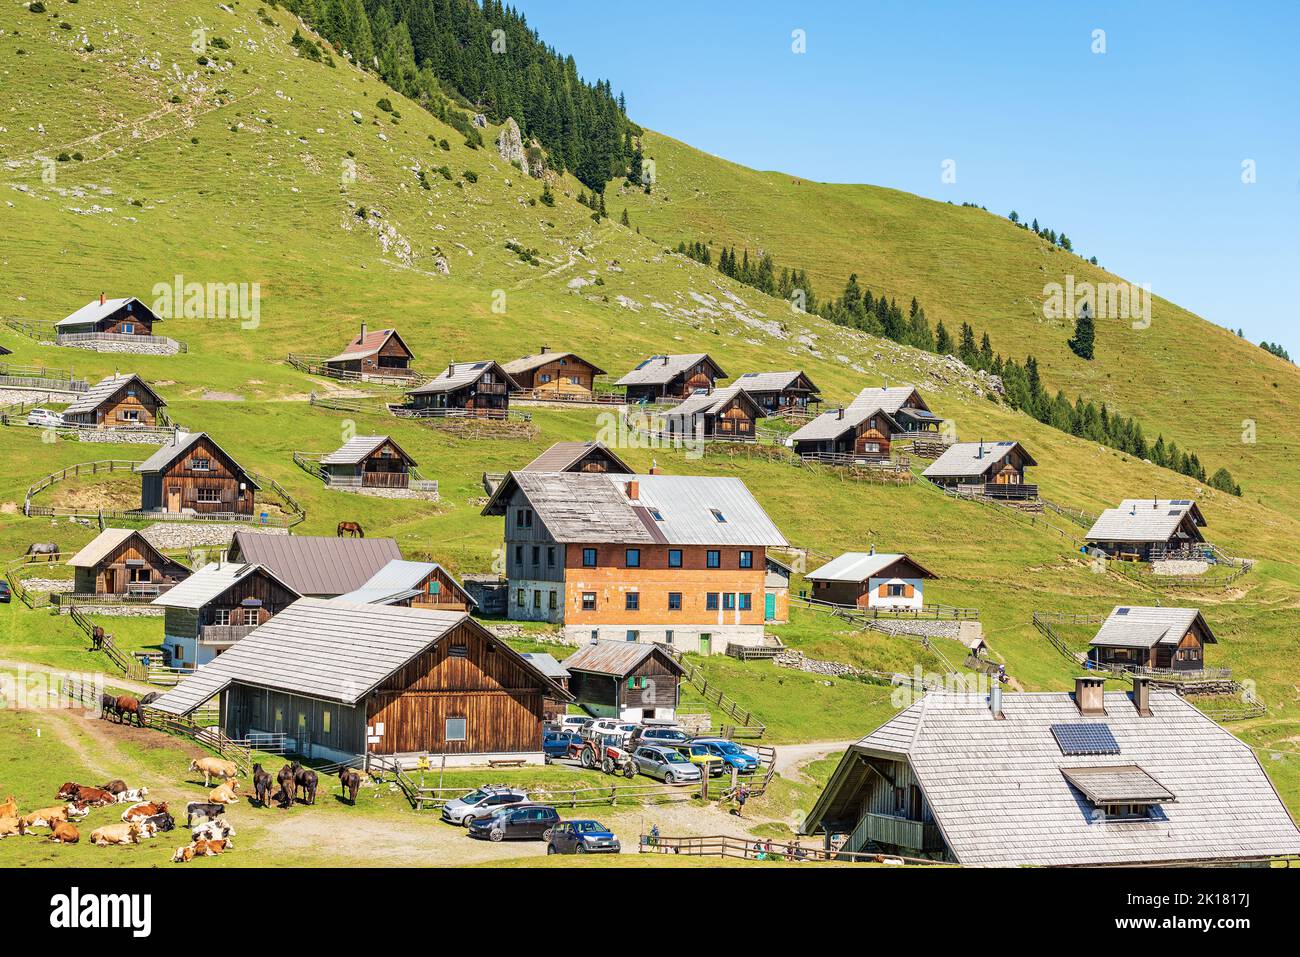 Village, Carnic Alps with herd of dairy cows and horses. Mountain peak of Osternig or Oisternig, Italy-Austria Border. Feistritz an der Gail, Austria. Stock Photo